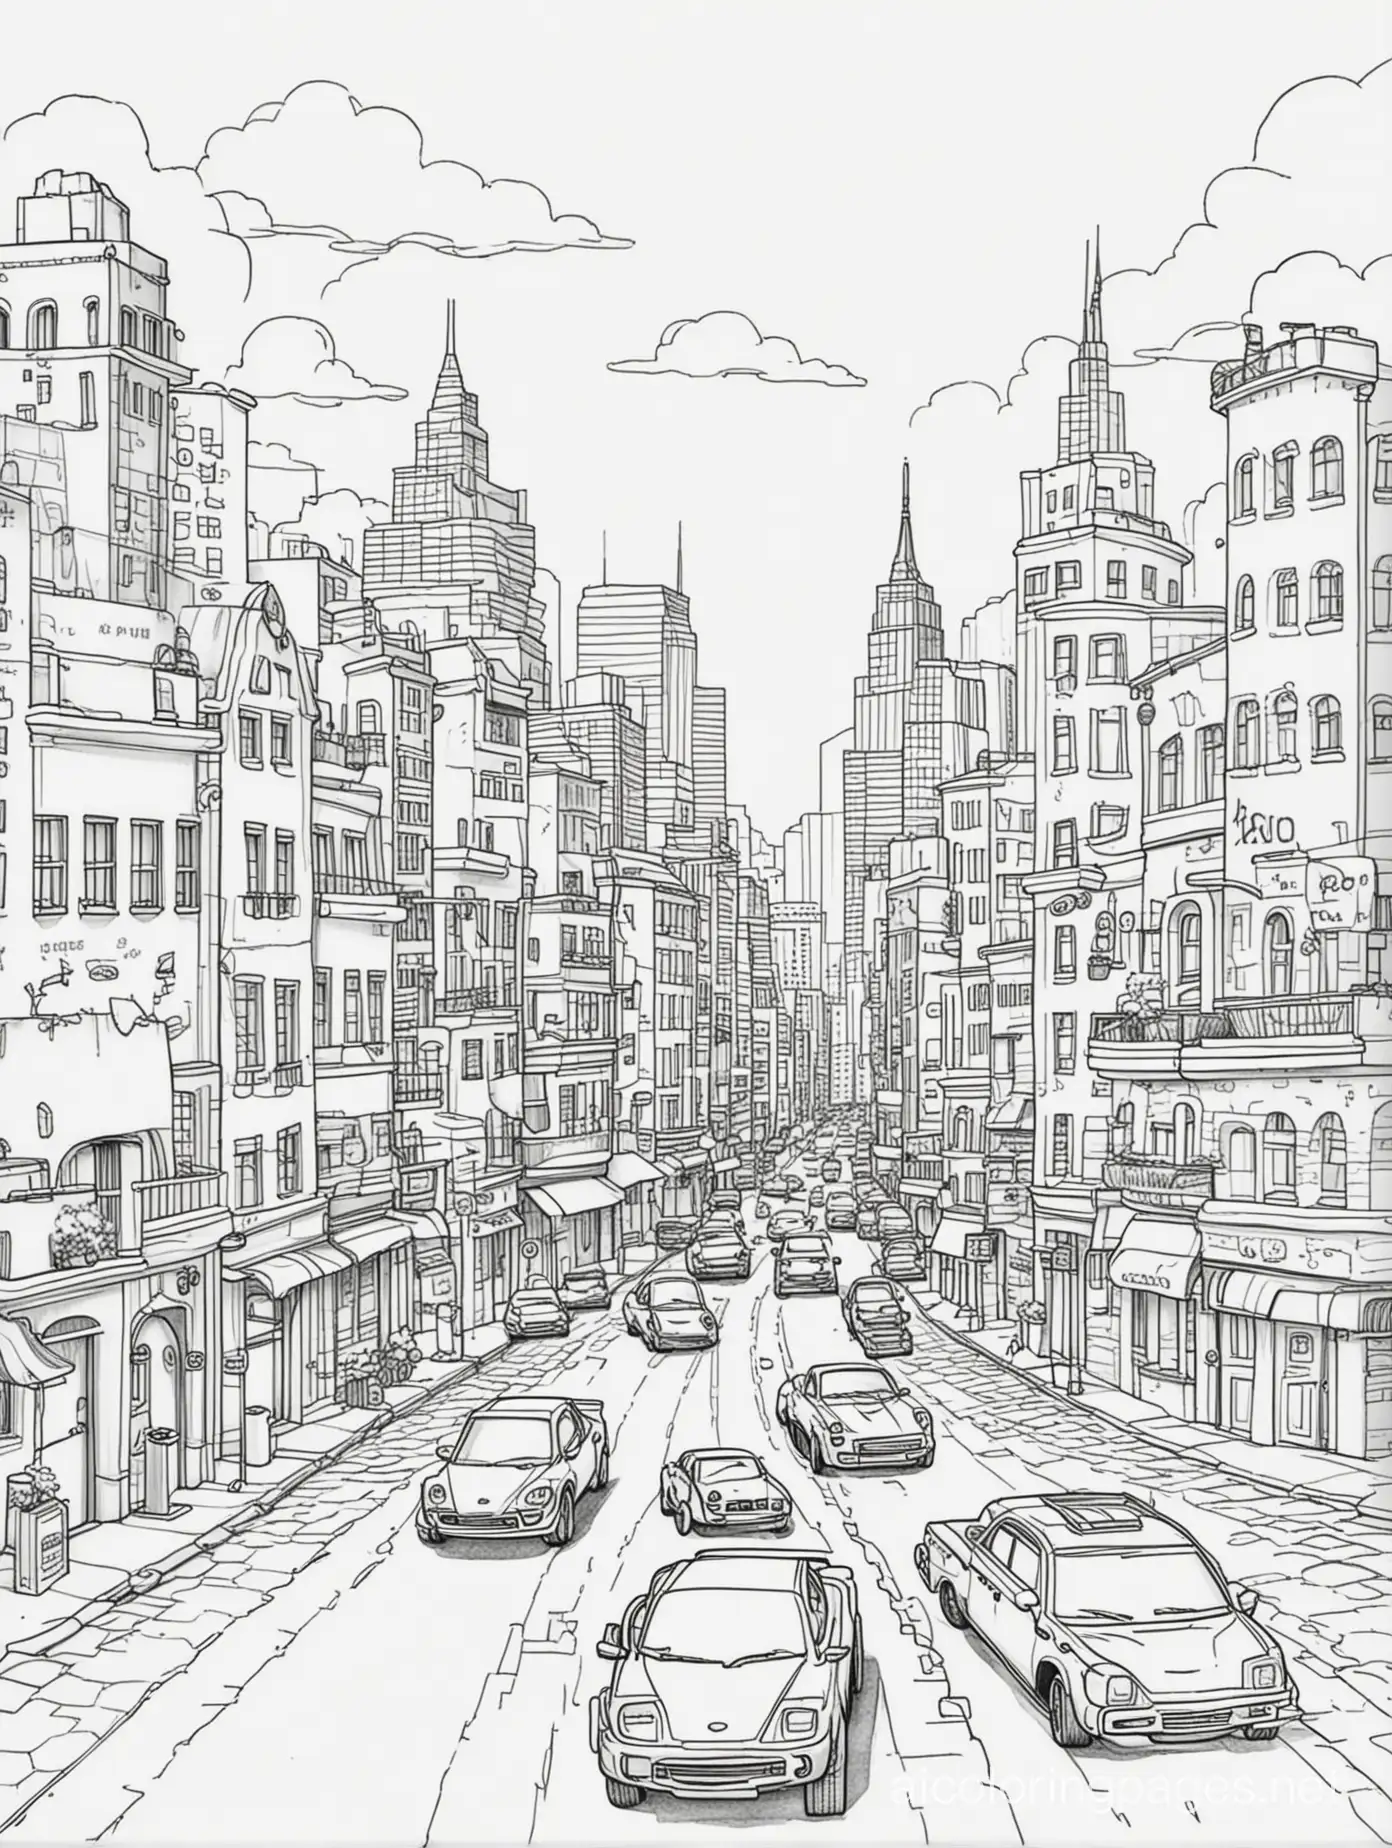 City with cars, Coloring Page, black and white, line art, white background, Simplicity, Ample White Space. The background of the coloring page is plain white to make it easy for young children to color within the lines. The outlines of all the subjects are easy to distinguish, making it simple for kids to color without too much difficulty